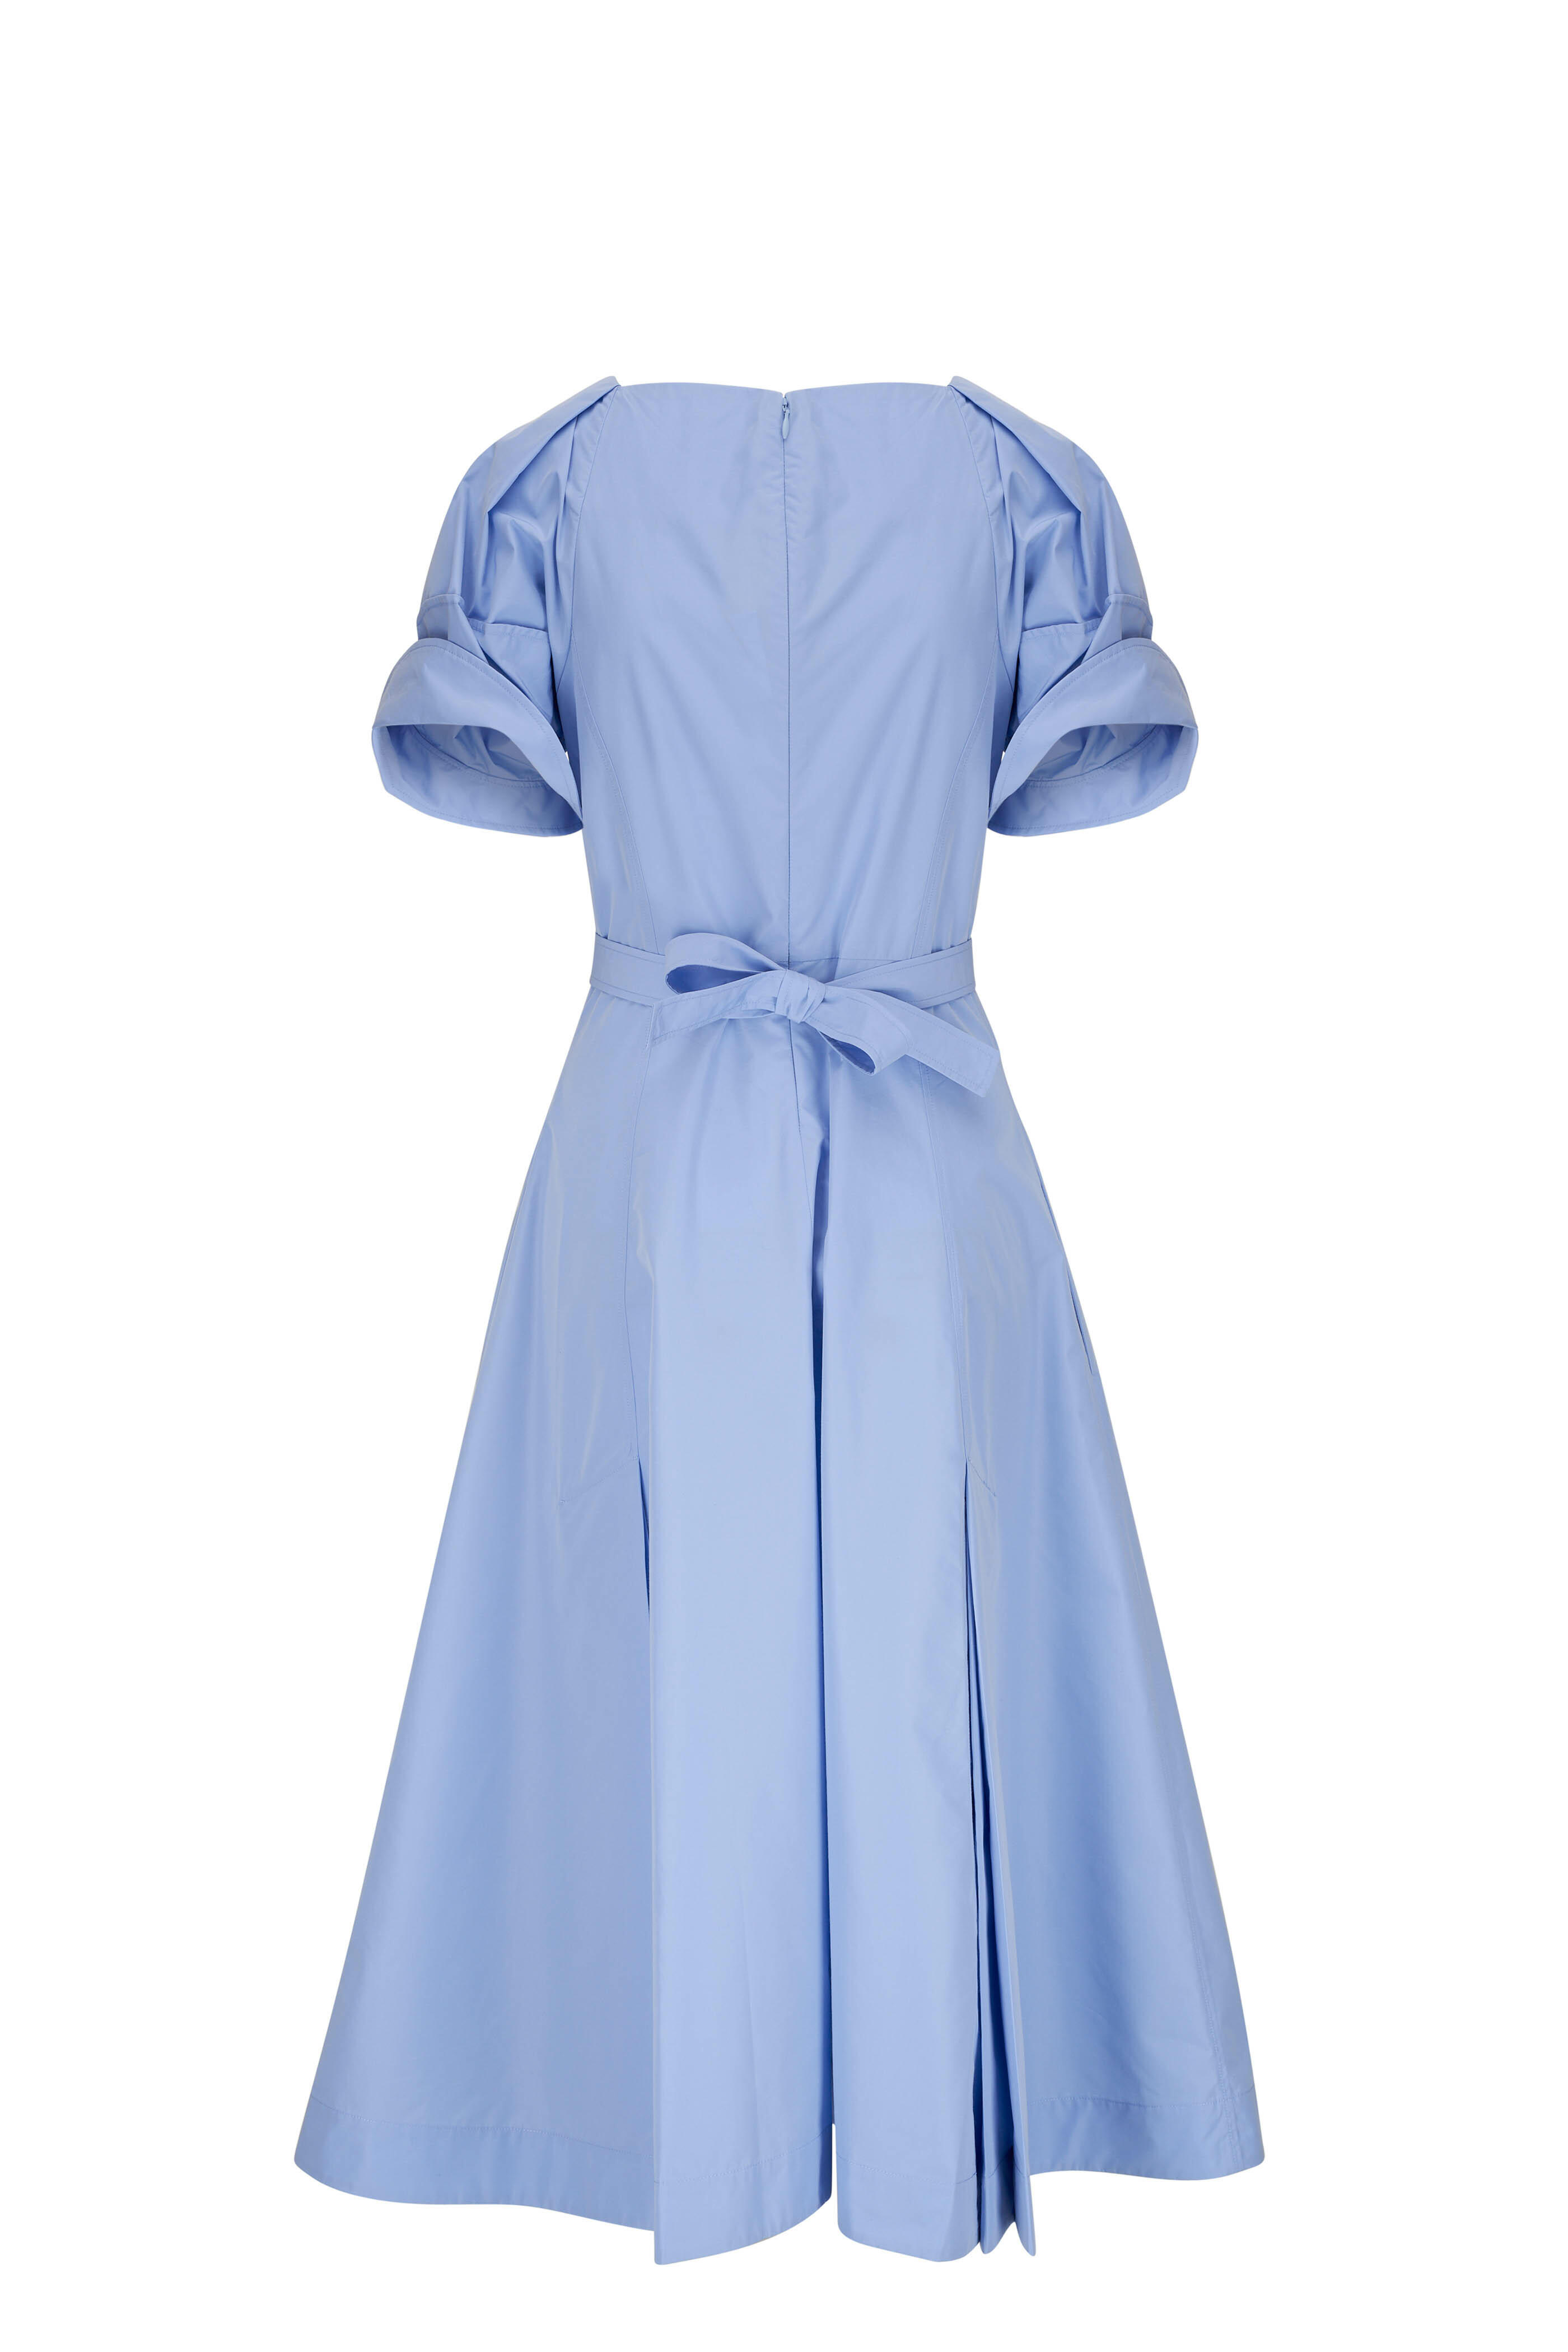 3.1 Phillip Lim - Oxford Blue Collapsed Bloom Sleeve Belted Dress